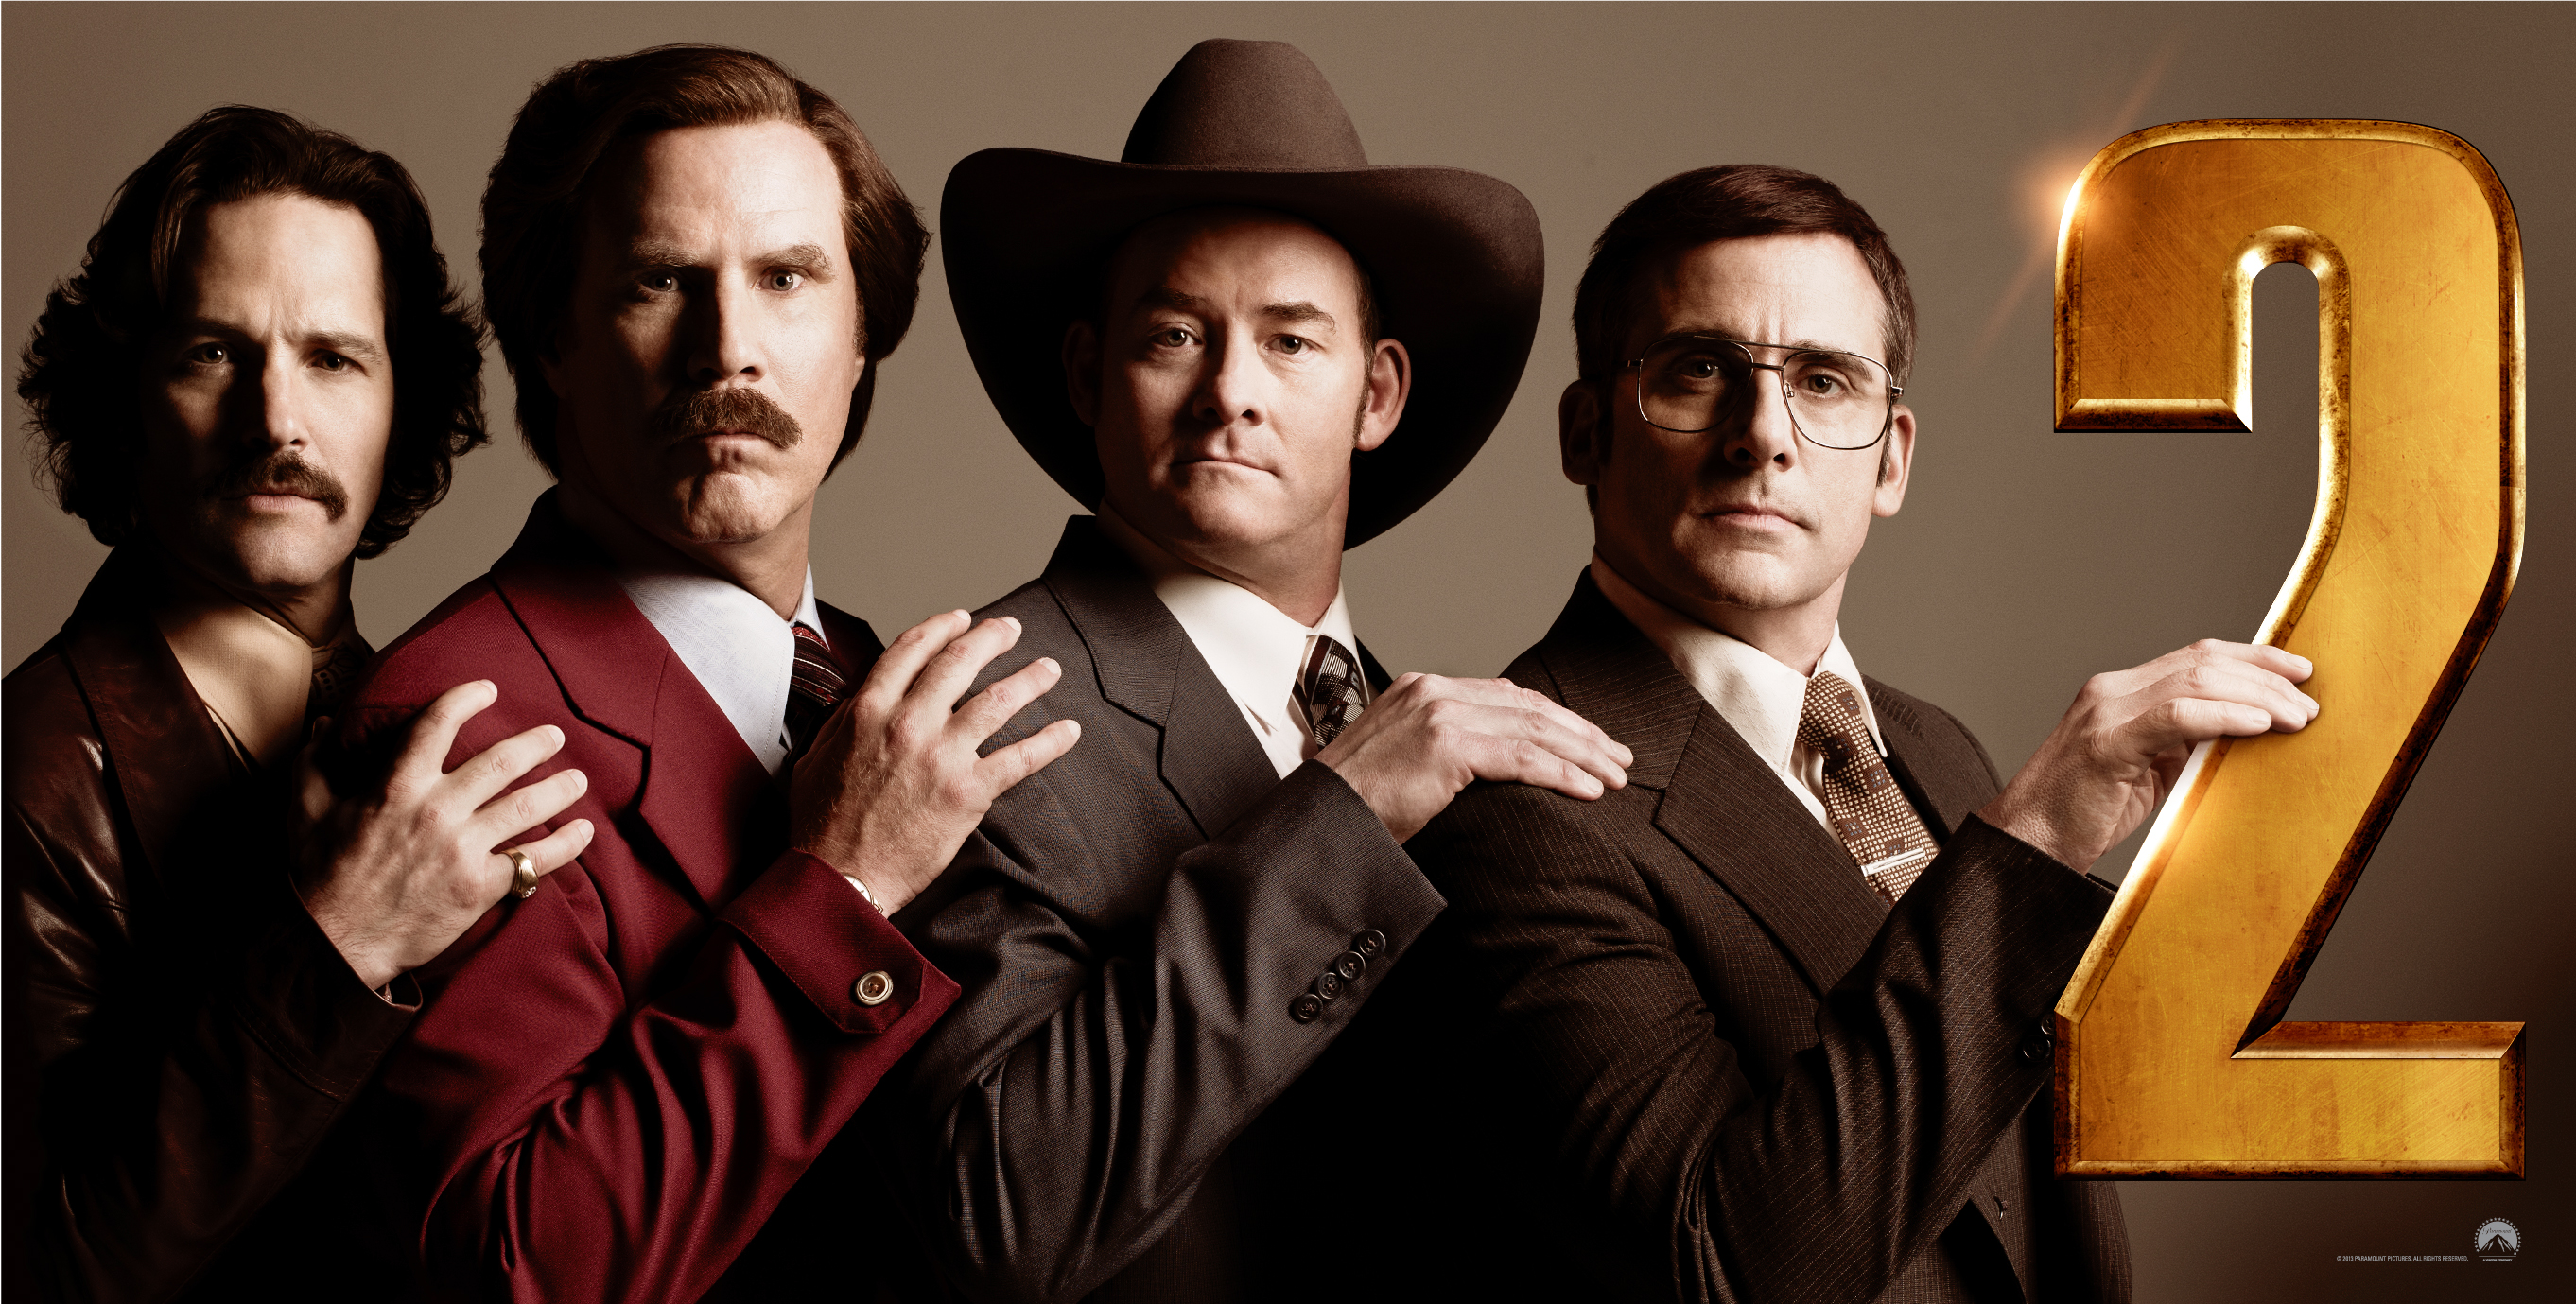 Archived: Review: Anchorman 2 – The Legend Continues (2013) - archived